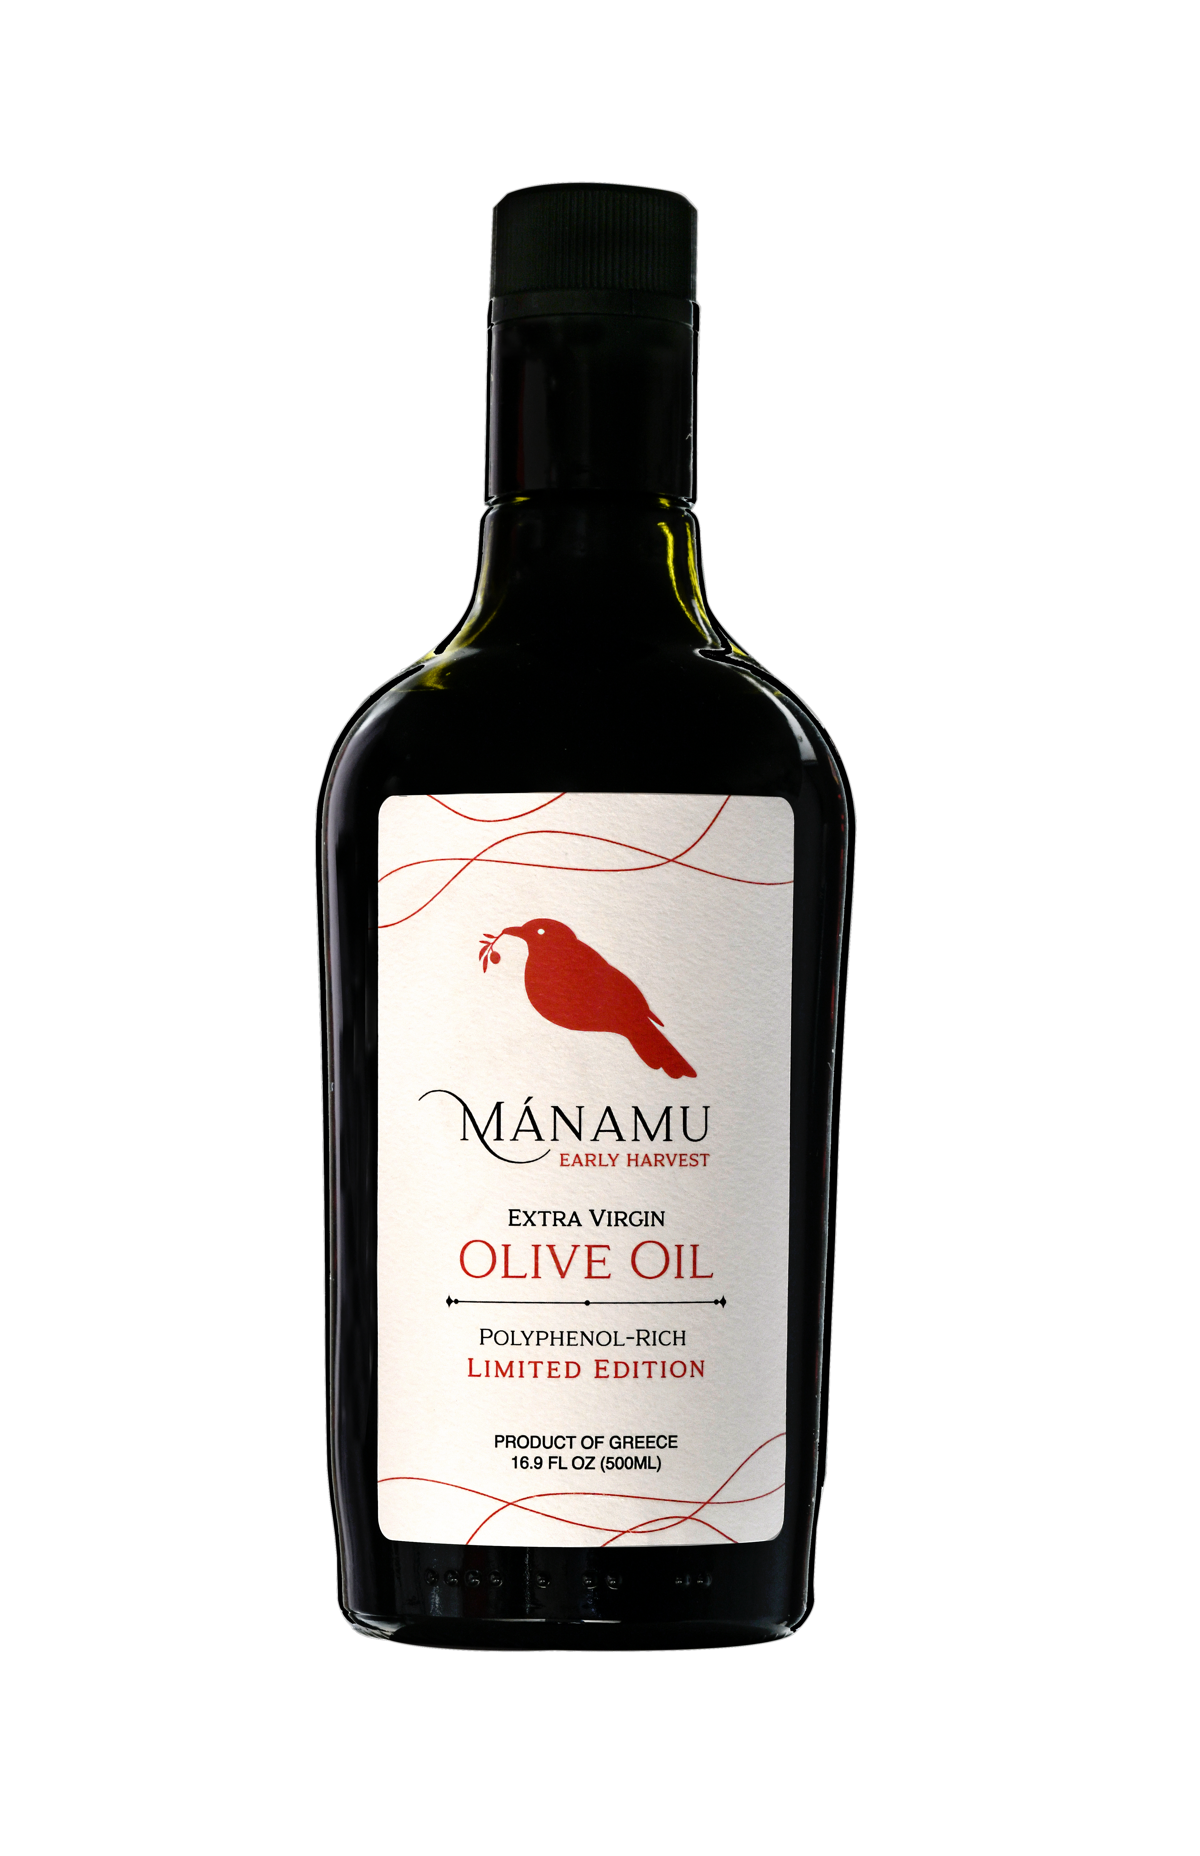 Extra Virgin Olive Oil "Early Harvest" (Rich in Polyphenols)